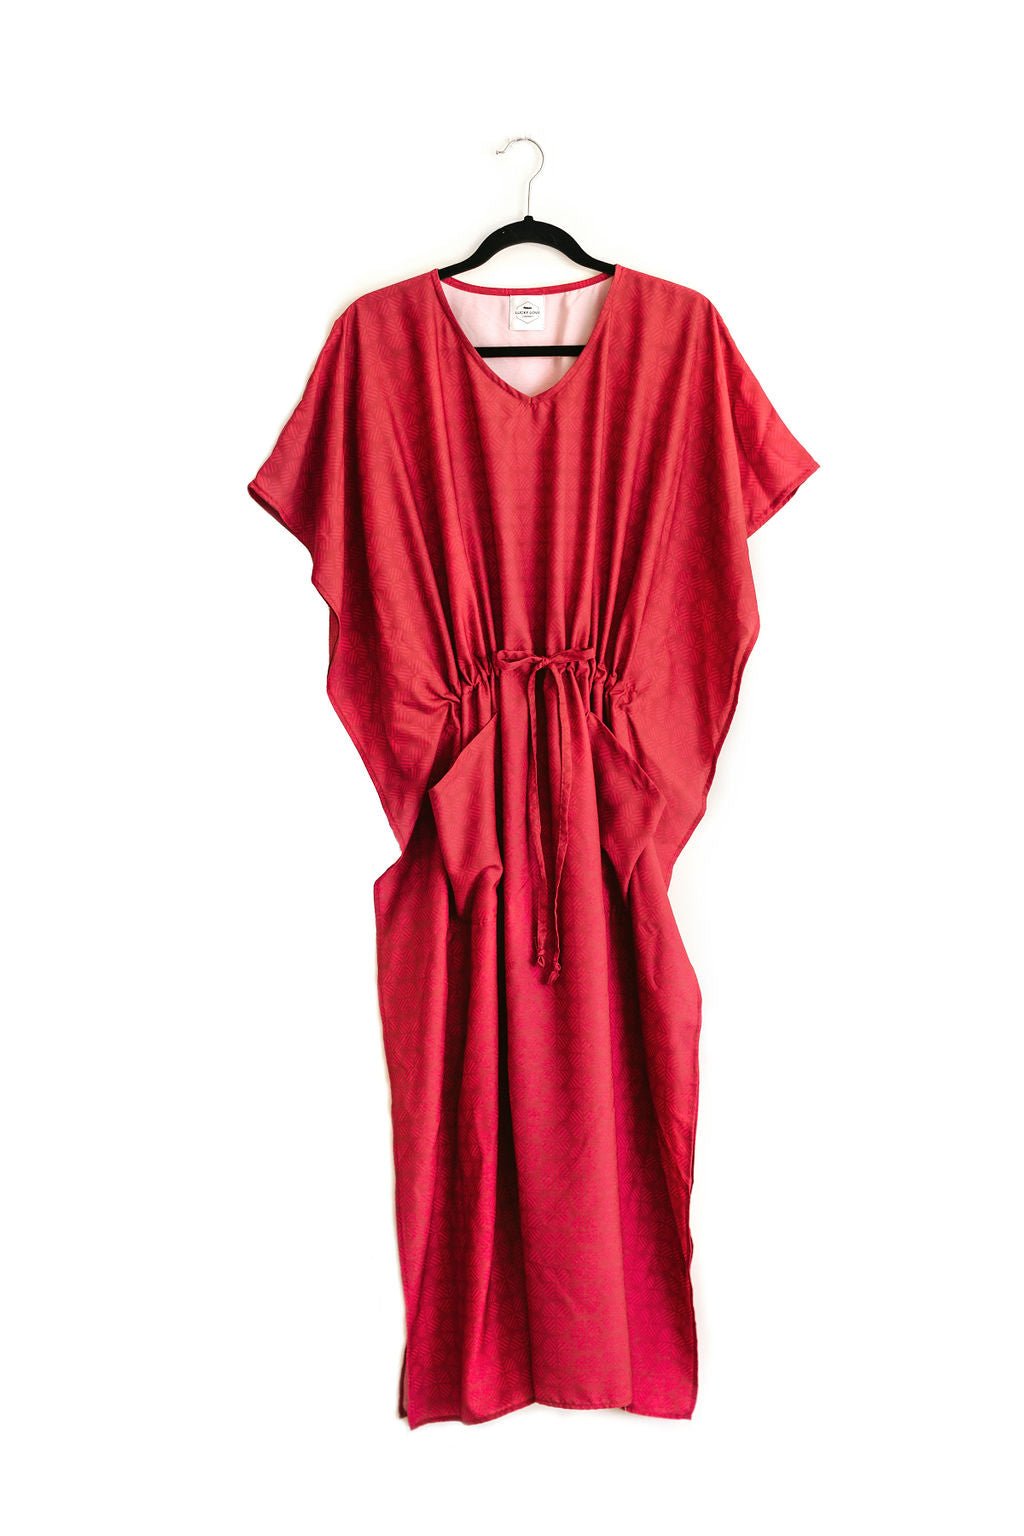 RUBY House Dress / Lightweight Soft Synthetic Silk / Effortless and Easy